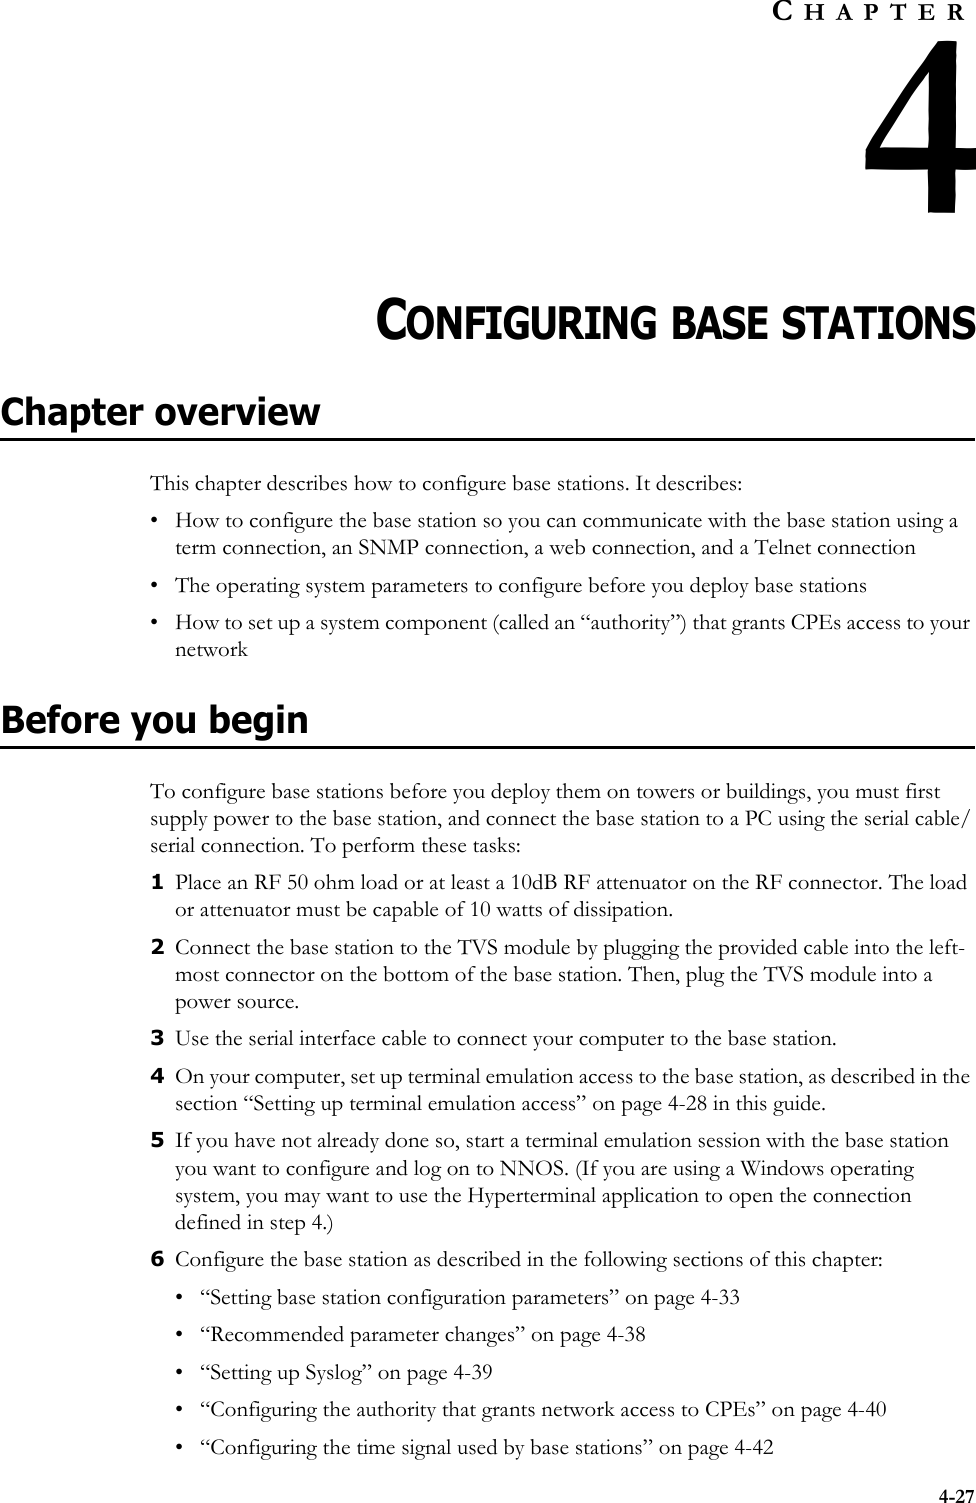 4-27CHAPTER4CHAPTER 4CONFIGURING BASE STATIONSChapter overviewThis chapter describes how to configure base stations. It describes:• How to configure the base station so you can communicate with the base station using a term connection, an SNMP connection, a web connection, and a Telnet connection• The operating system parameters to configure before you deploy base stations• How to set up a system component (called an “authority”) that grants CPEs access to your networkBefore you beginTo configure base stations before you deploy them on towers or buildings, you must first supply power to the base station, and connect the base station to a PC using the serial cable/serial connection. To perform these tasks:1Place an RF 50 ohm load or at least a 10dB RF attenuator on the RF connector. The load or attenuator must be capable of 10 watts of dissipation. 2Connect the base station to the TVS module by plugging the provided cable into the left-most connector on the bottom of the base station. Then, plug the TVS module into a power source.3Use the serial interface cable to connect your computer to the base station. 4On your computer, set up terminal emulation access to the base station, as described in the section “Setting up terminal emulation access” on page 4-28 in this guide. 5If you have not already done so, start a terminal emulation session with the base station you want to configure and log on to NNOS. (If you are using a Windows operating system, you may want to use the Hyperterminal application to open the connection defined in step 4.) 6Configure the base station as described in the following sections of this chapter:• “Setting base station configuration parameters” on page 4-33• “Recommended parameter changes” on page 4-38• “Setting up Syslog” on page 4-39• “Configuring the authority that grants network access to CPEs” on page 4-40• “Configuring the time signal used by base stations” on page 4-42